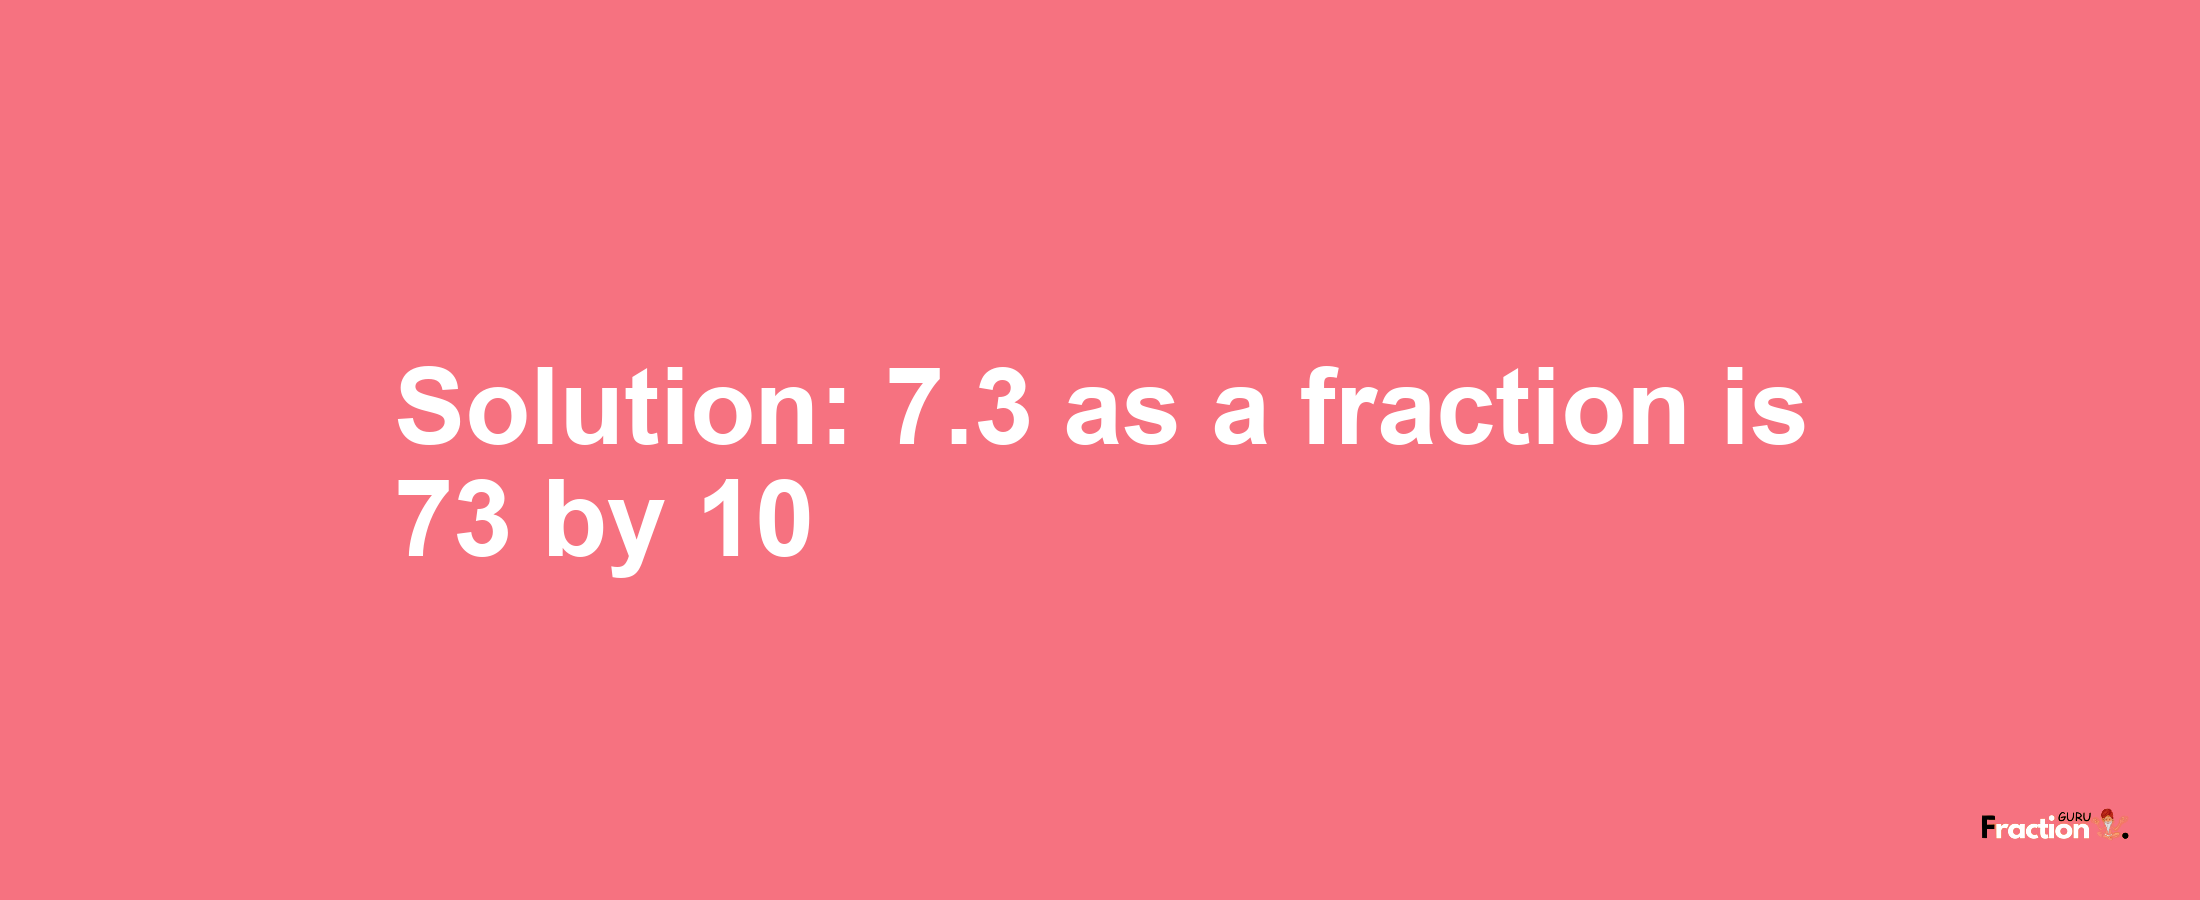 Solution:7.3 as a fraction is 73/10